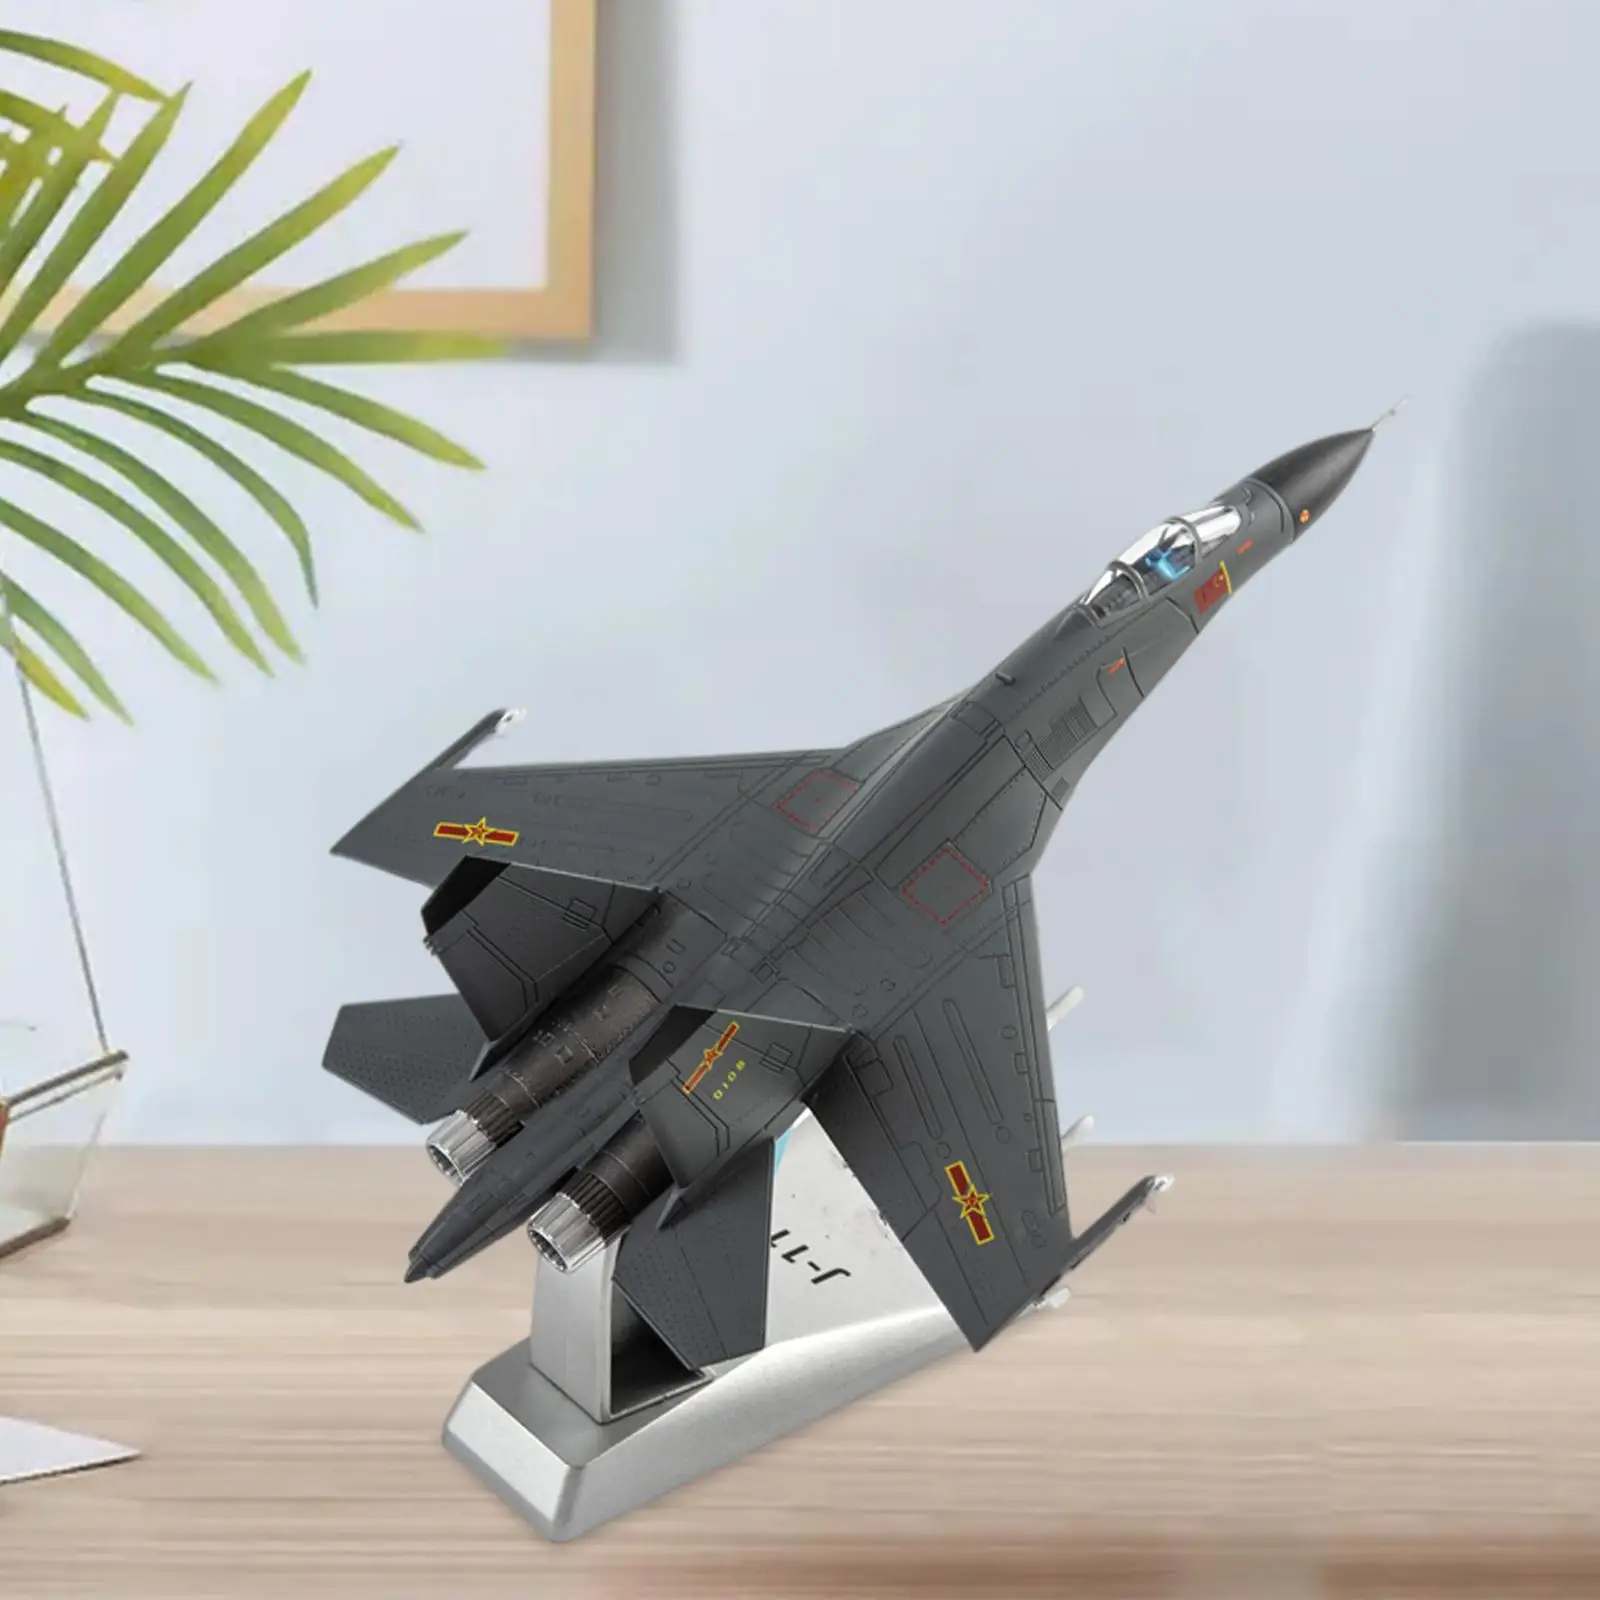 Alloy Diecast 1/100 Scale Aircraft J-11 Fighter Collectables Ornaments with Dispaly Stand Model Plane